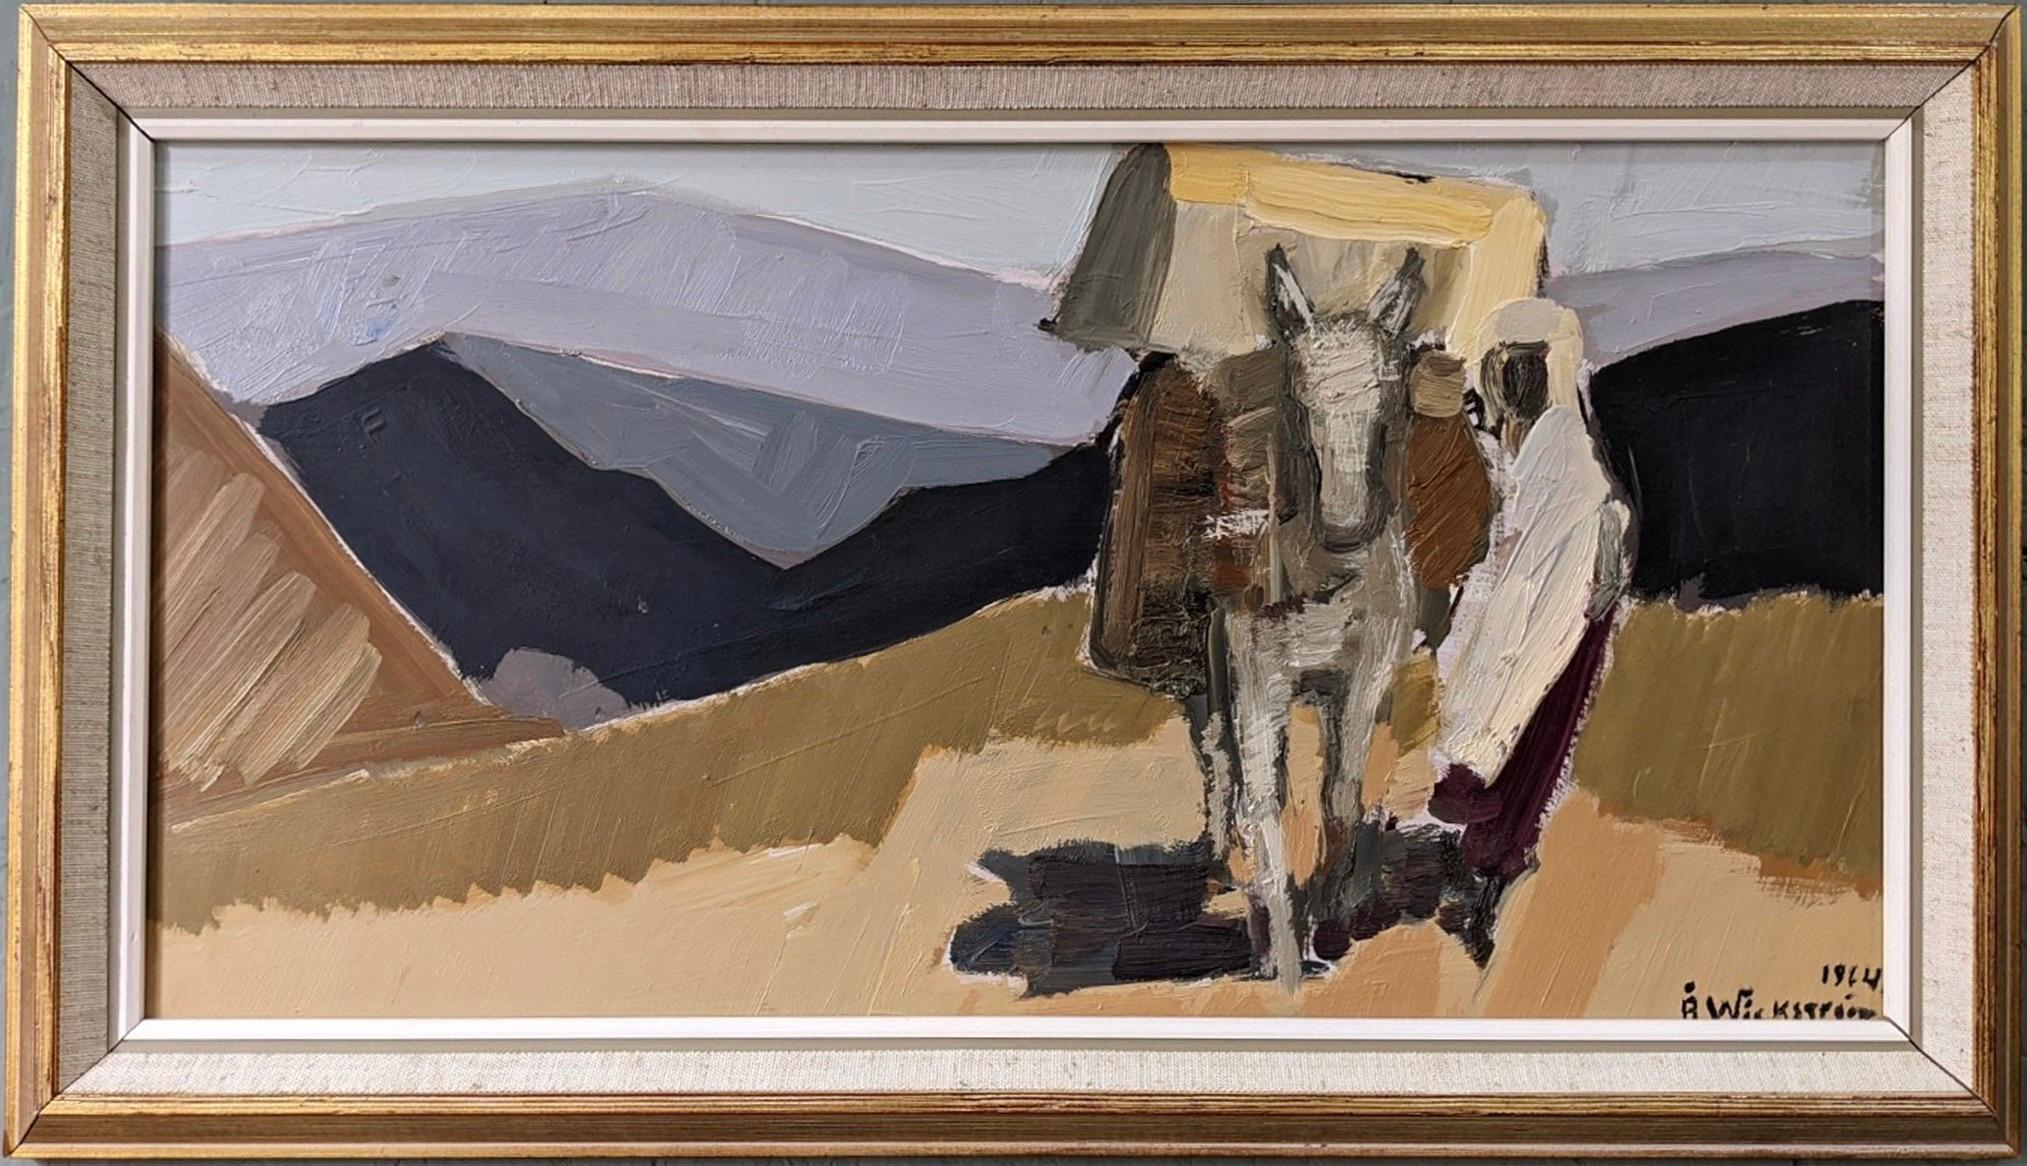 Unknown Landscape Painting - 1964 Vintage Mid-Century Swedish Landscape Oil Painting - In the Desert